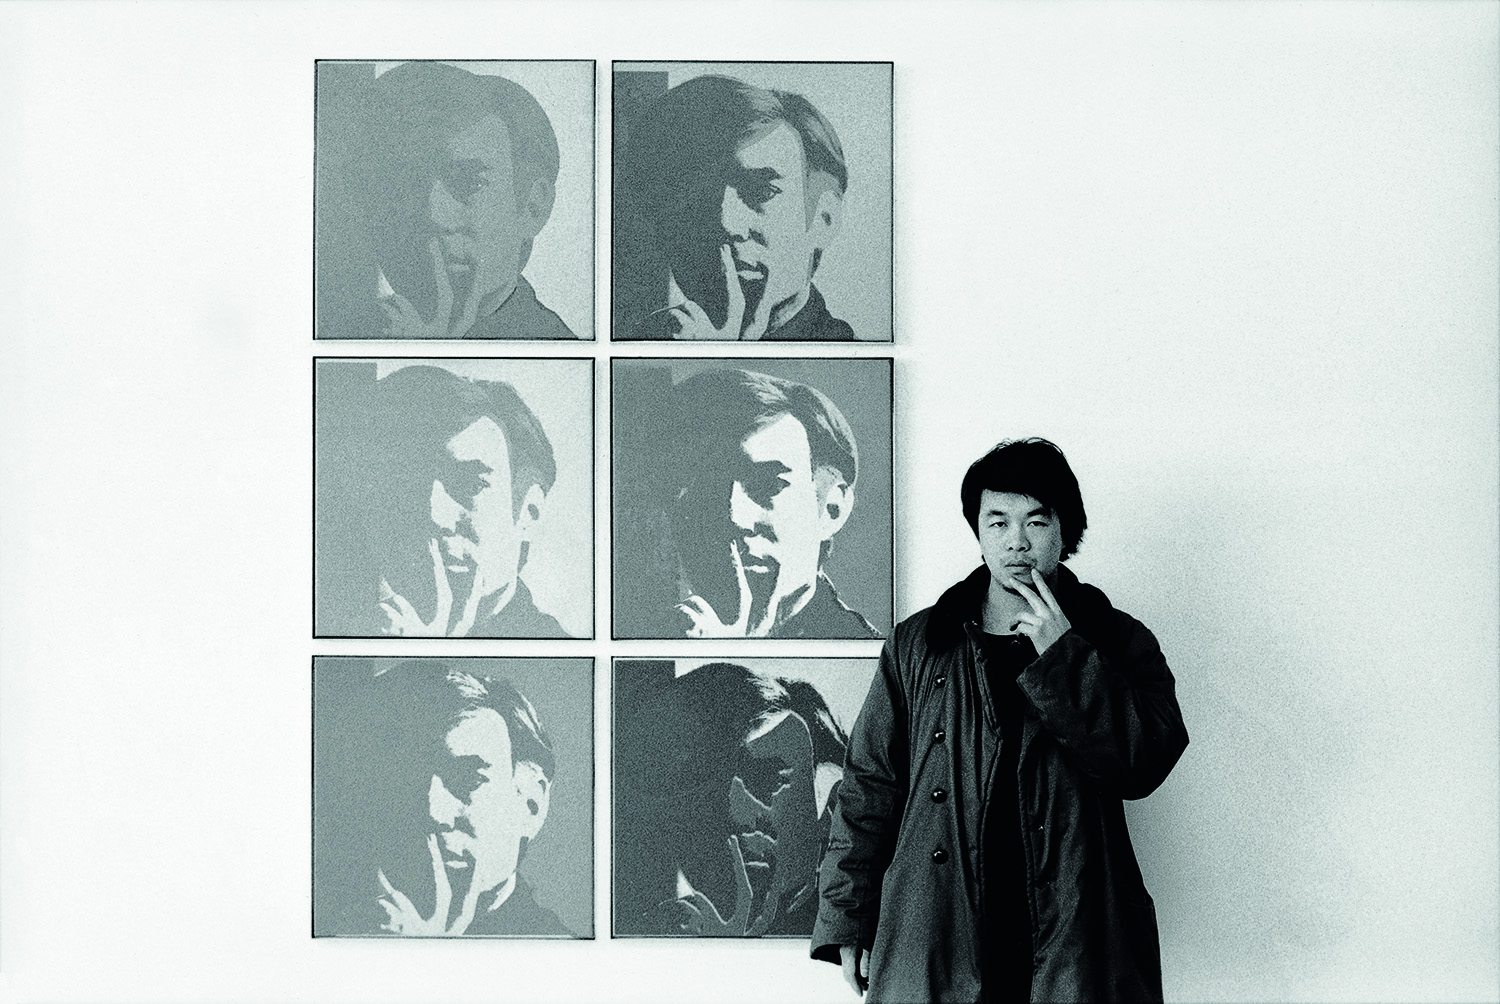 Ai Weiwei, 'At the Museum of Modern Art,' 1987 (detail), from the 'New York Photographs' series 1983–93, Collection of Ai Weiwei, © Ai Weiwei; Andy Warhol artwork © The Andy Warhol Foundation for the Visual Arts Inc.